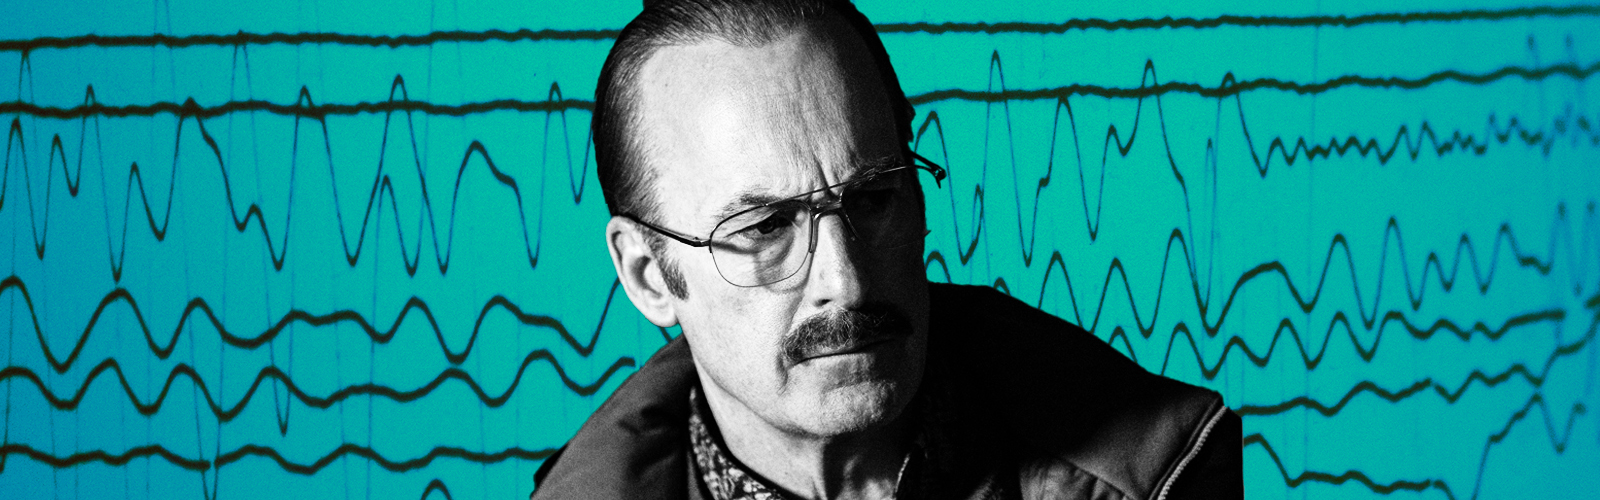 The ‘Better Call Saul’ Lie Detector Test: It’s Never A Good Sign When You Are Sobbing On A Bus